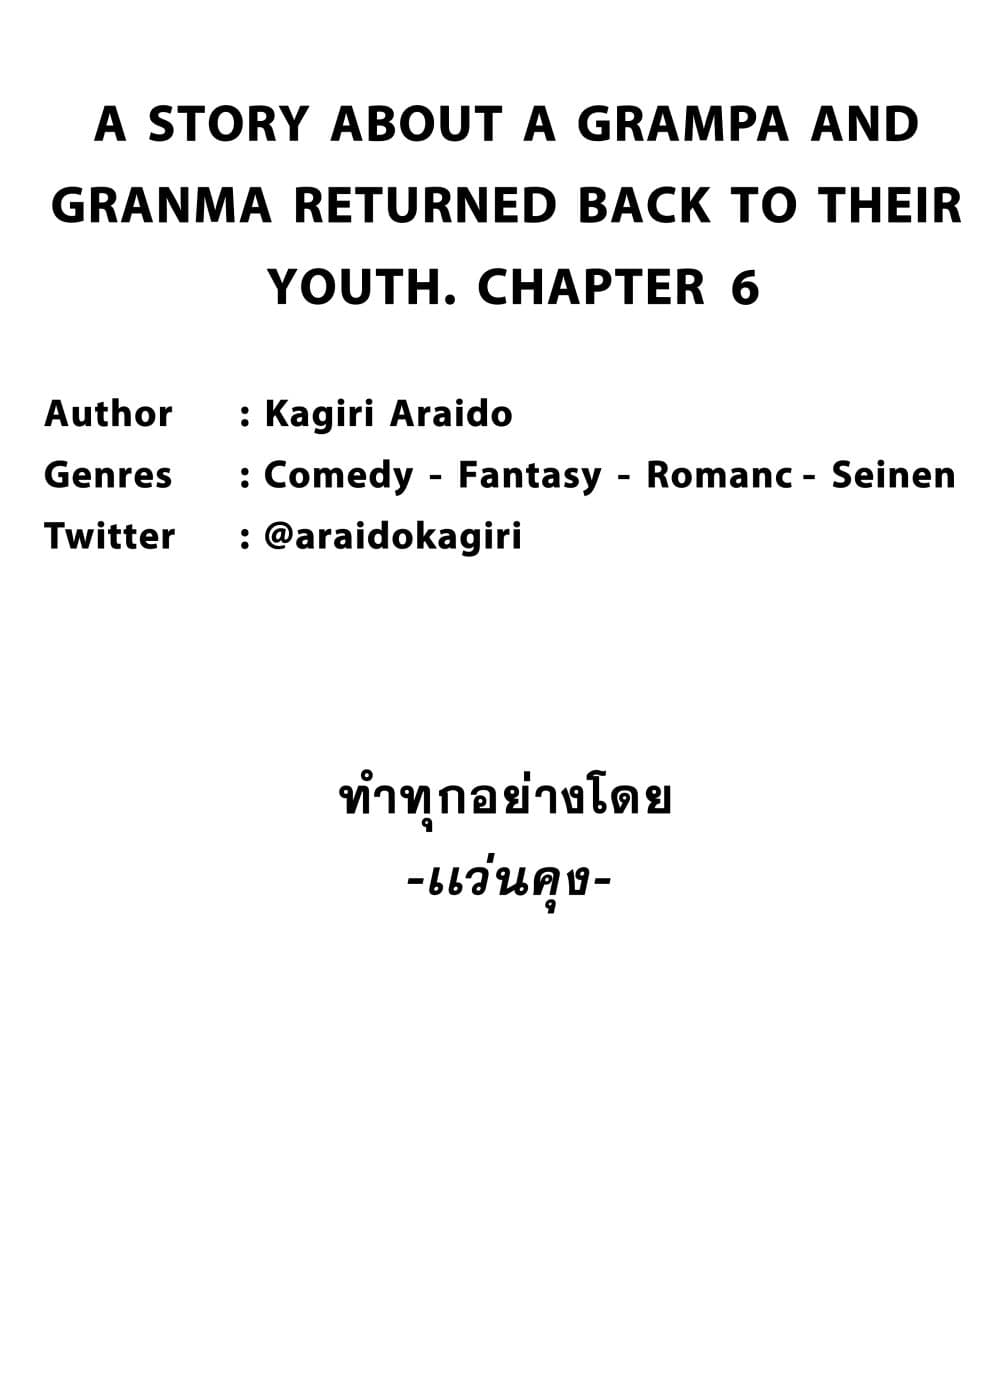 A Story About A Grampa and Granma Returned Back to their Youth คู่รักวัยดึกหวนคืนวัยหวาน 6-6